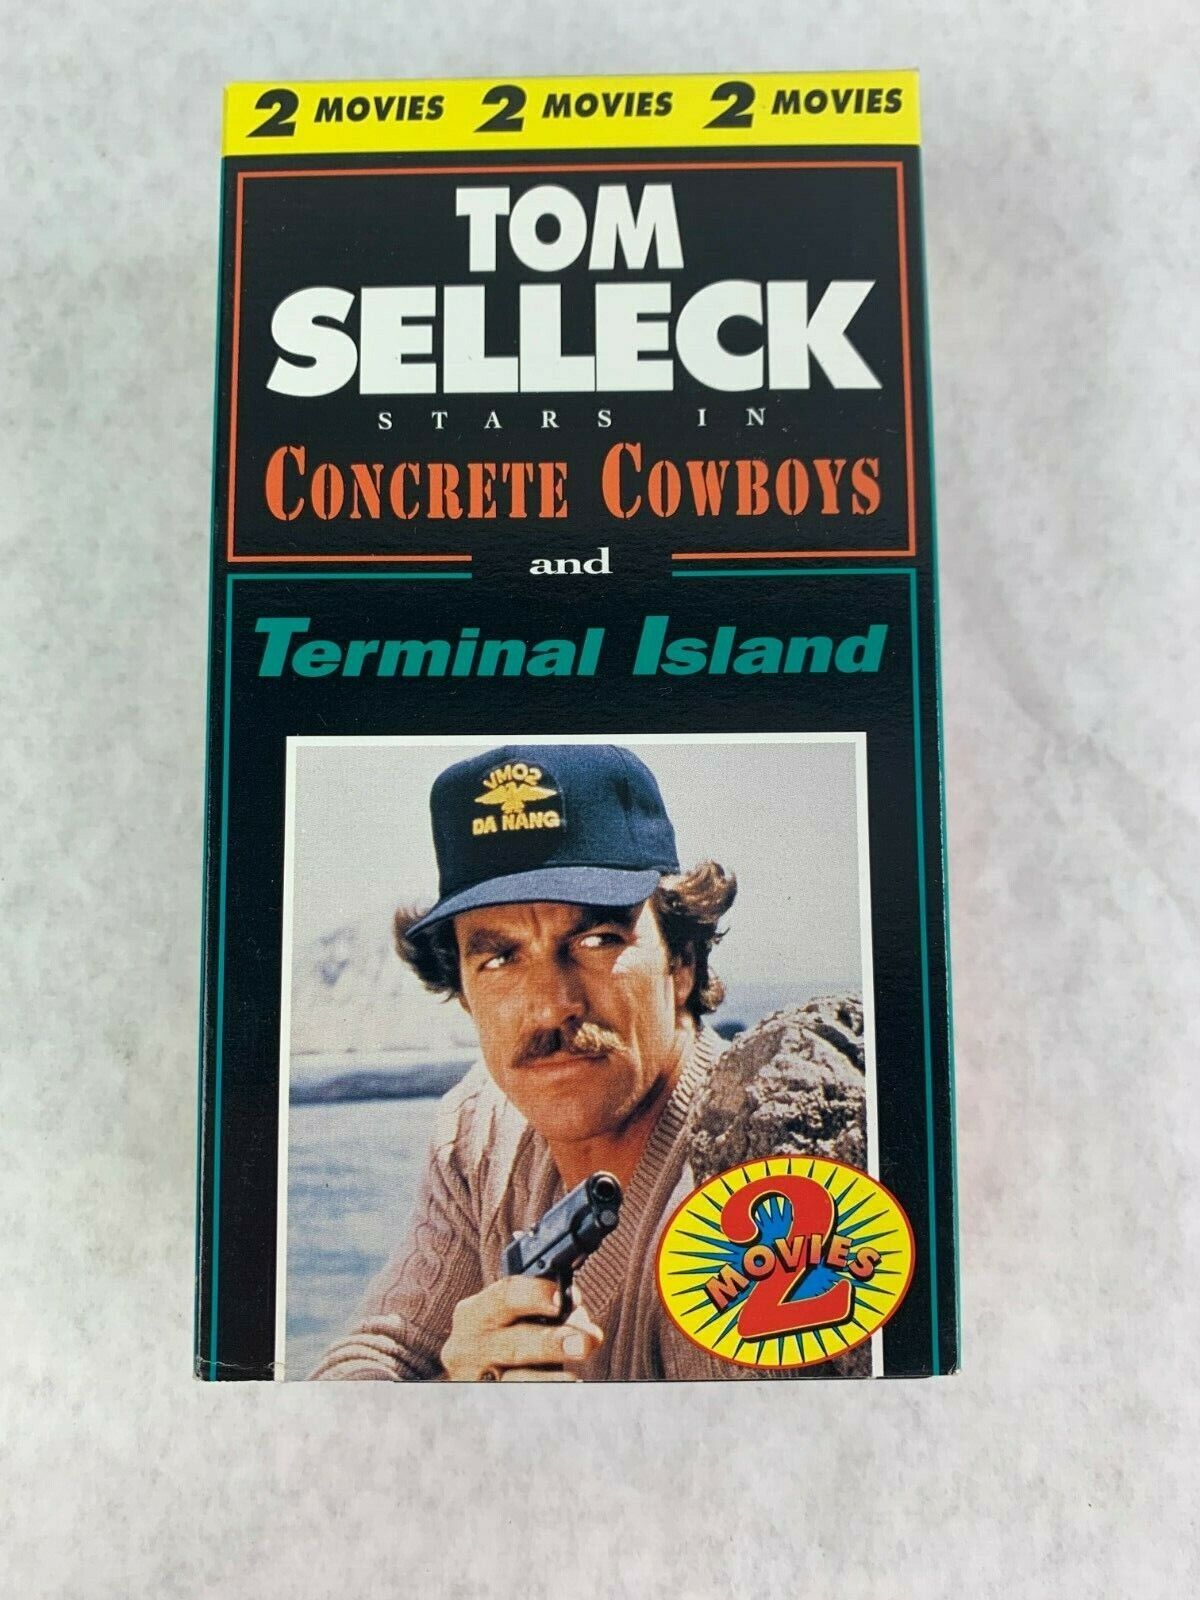 Vintage Classic The Concrete Cowboys and Terminal Island Tom Selleck 2 Movie Set